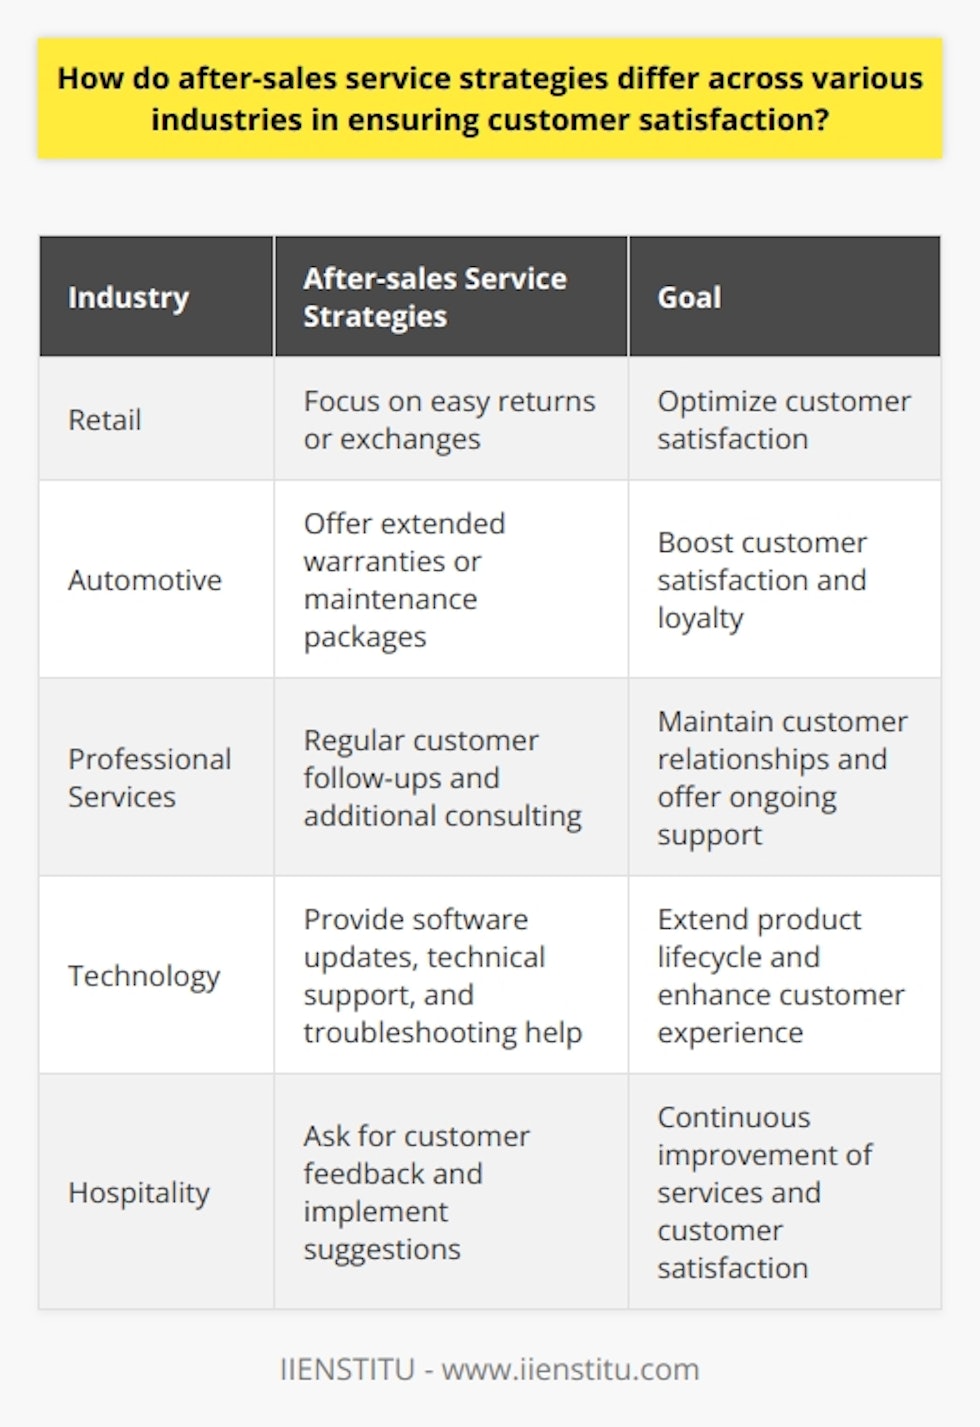 After-sales service strategies can differ significantly across various industries in their approach to ensuring customer satisfaction. In the retail industry, for example, a common strategy is to focus on easy returns or exchanges. Retailers prioritize clear communication about their return policies, making it simple and hassle-free for customers to return or exchange products. By reducing the customer's effort and providing a smooth process, retailers aim to optimize customer satisfaction.In the automotive industry, after-sales service strategies often revolve around offering extended warranties or maintenance packages. This approach aims to provide customers with peace of mind regarding the upkeep of their vehicles. By offering these extended services, automotive companies aim to boost customer satisfaction and loyalty.The professional services sector employs a different strategy, relying heavily on regular customer follow-ups. This strategy helps to maintain ongoing contact with clients and strengthen the relationship. Additionally, professionals in this sector may offer additional consulting or assistance to address any issues that arise. By providing ongoing support, the professional services sector ensures high customer satisfaction levels.The technology industry takes a unique approach to after-sales service. Their strategies typically involve offering software updates and technical support to extend the product's life cycle and enhance the customer experience. Technology companies often provide in-depth troubleshooting help, which is often available 24/7 to assist customers in resolving any issues they may encounter.In the hospitality industry, after-sales service often focuses on asking for customer feedback and implementing suggestions. By actively seeking feedback and implementing necessary changes, the hospitality industry continuously strives to improve the quality of its services. This approach not only leads to improved customer satisfaction but also demonstrates a genuine commitment to meeting customer needs.In conclusion, after-sales service strategies vary across different industries. These strategies are tailored to meet the unique operational structures and customer expectations of each industry. By implementing effective after-sales service strategies, businesses aim to enhance customer engagement and satisfaction beyond the initial sale. This fosters long-term loyalty and provides a competitive edge in the market.